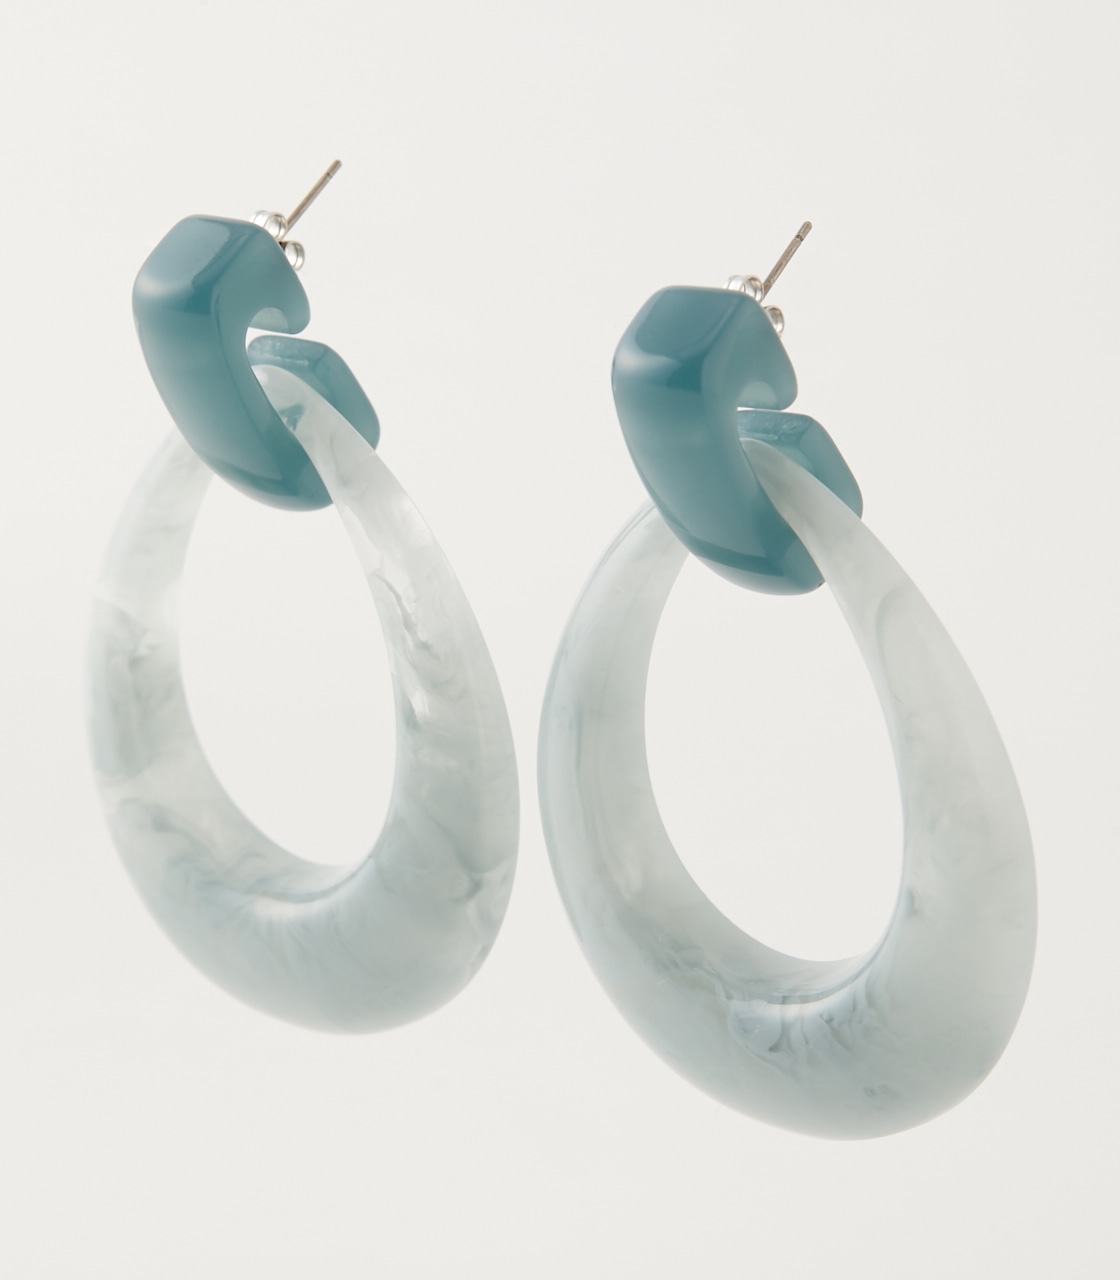 TEAR TYPE MARBLE EARRINGS/ティアタイプマーブルピアス 詳細画像 柄GRY 2